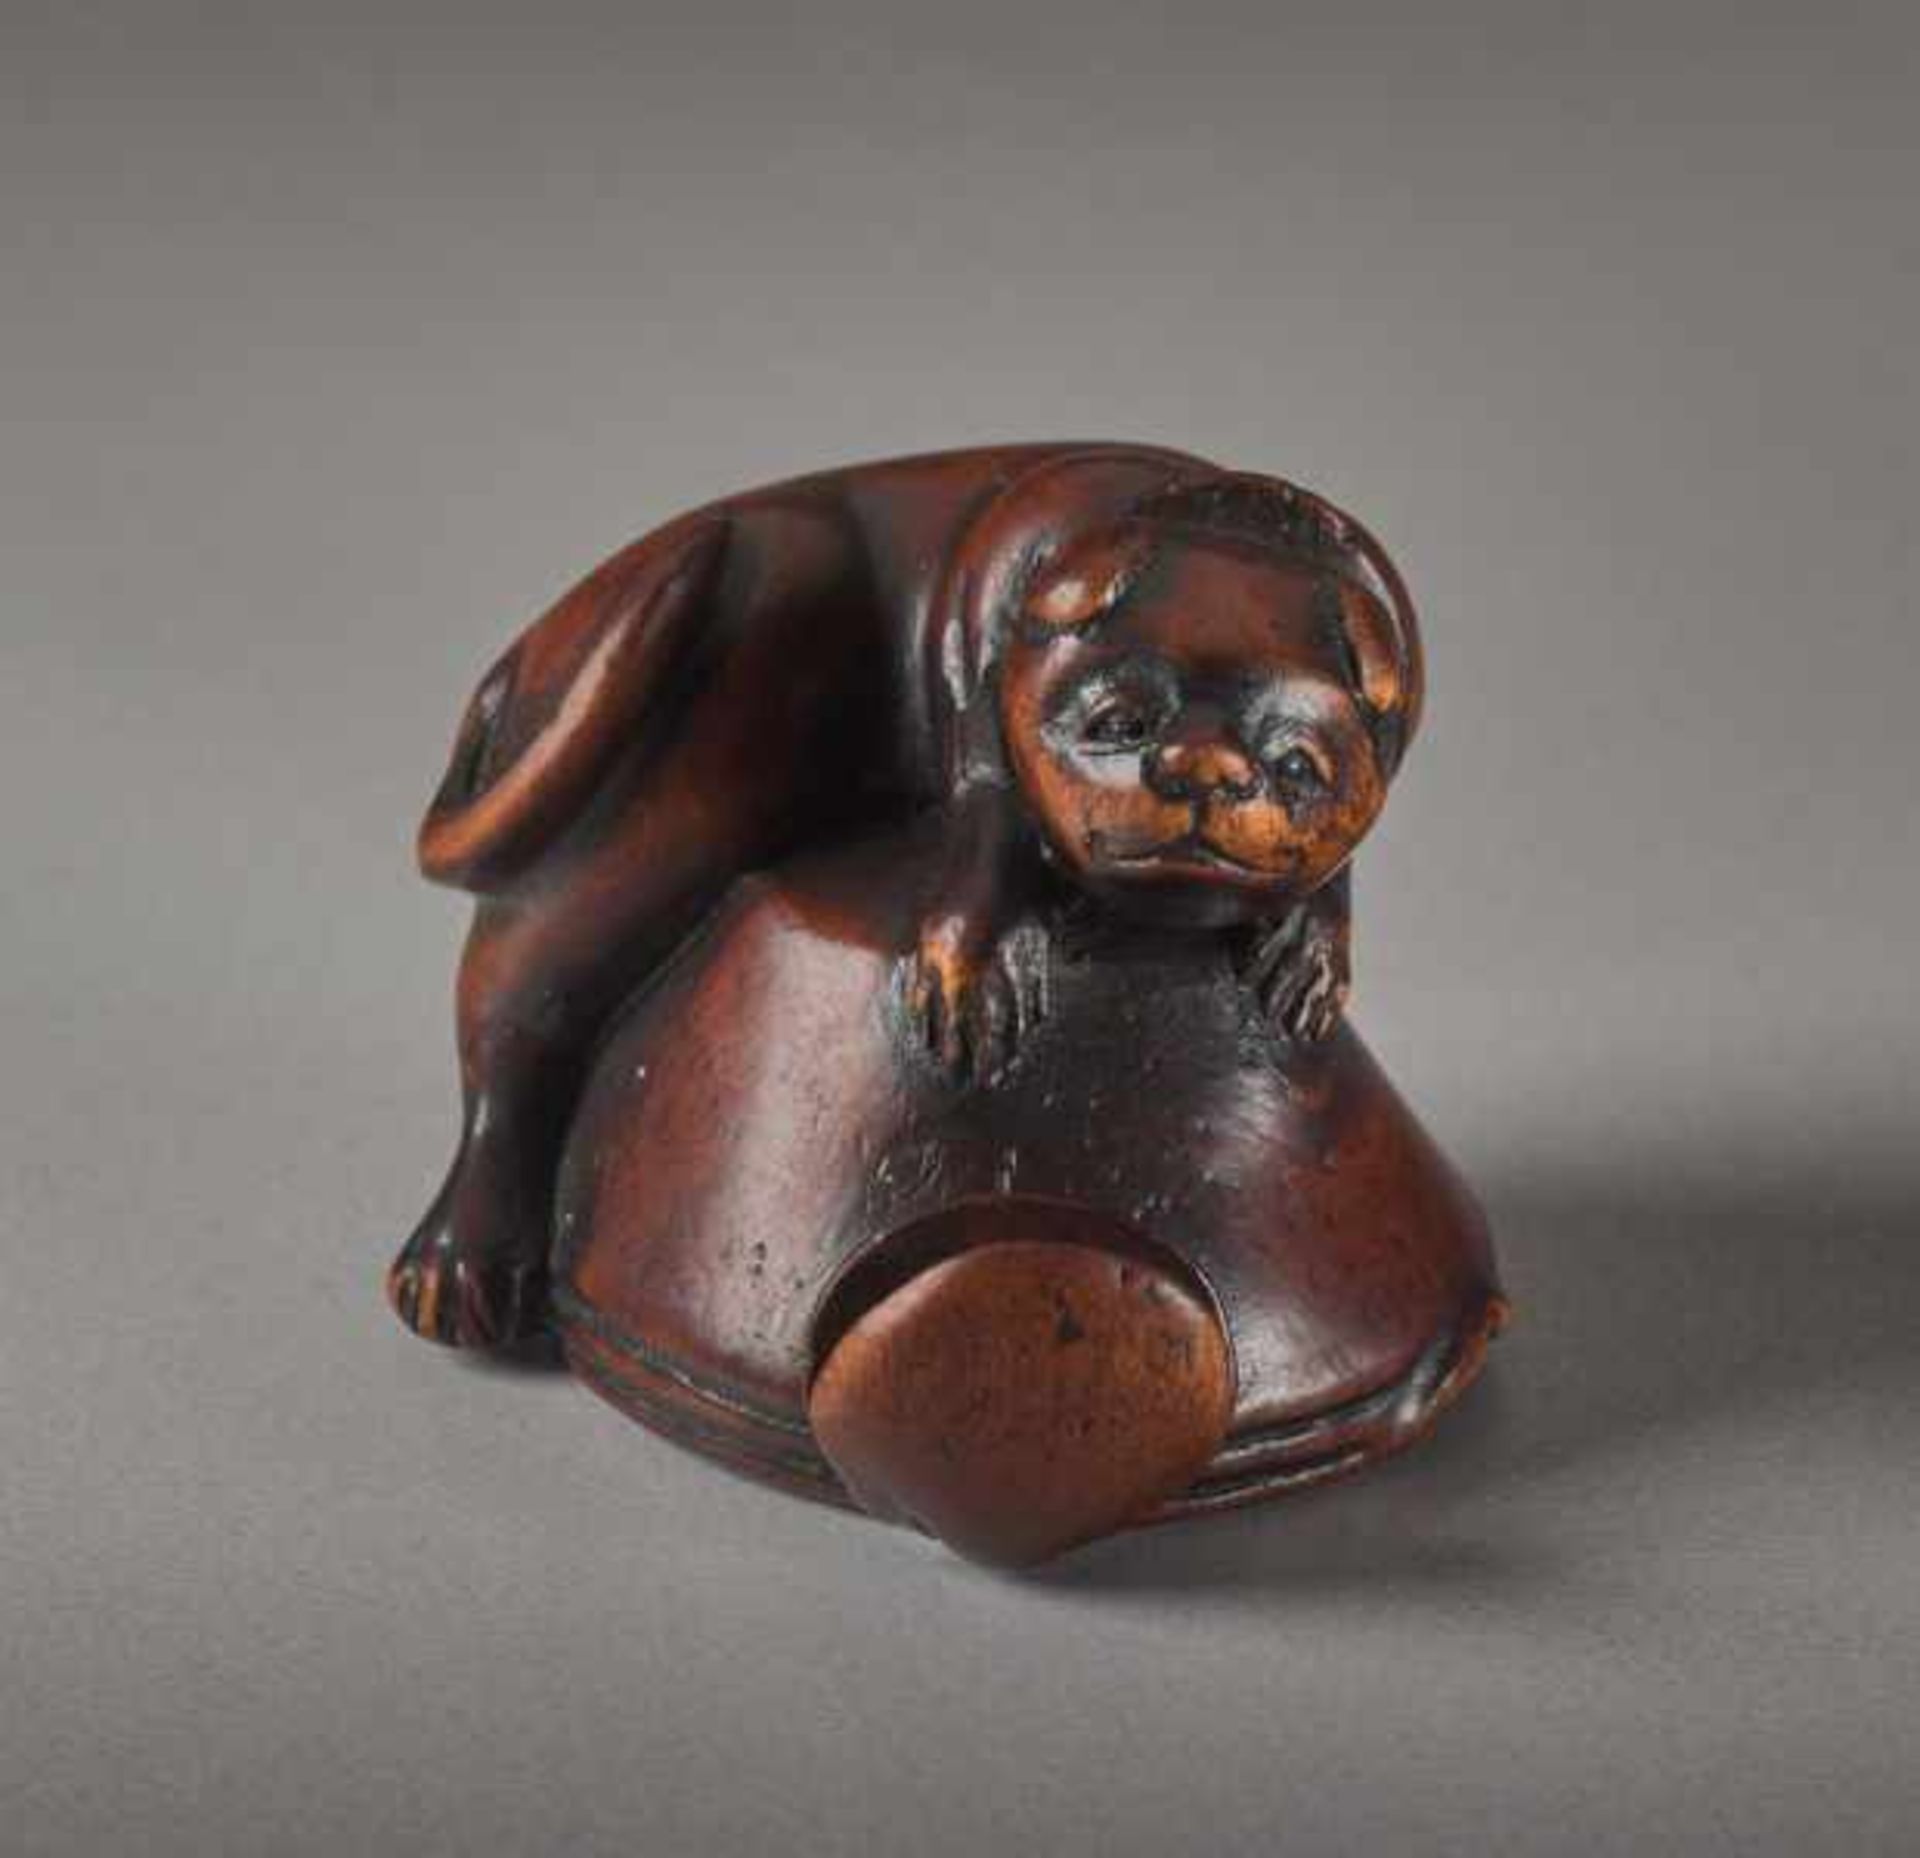 A WOOD NETSUKE OF A DOG AND OCTOPUS Wood netsuke. Japan, 19th centuryThe dog is placed on an